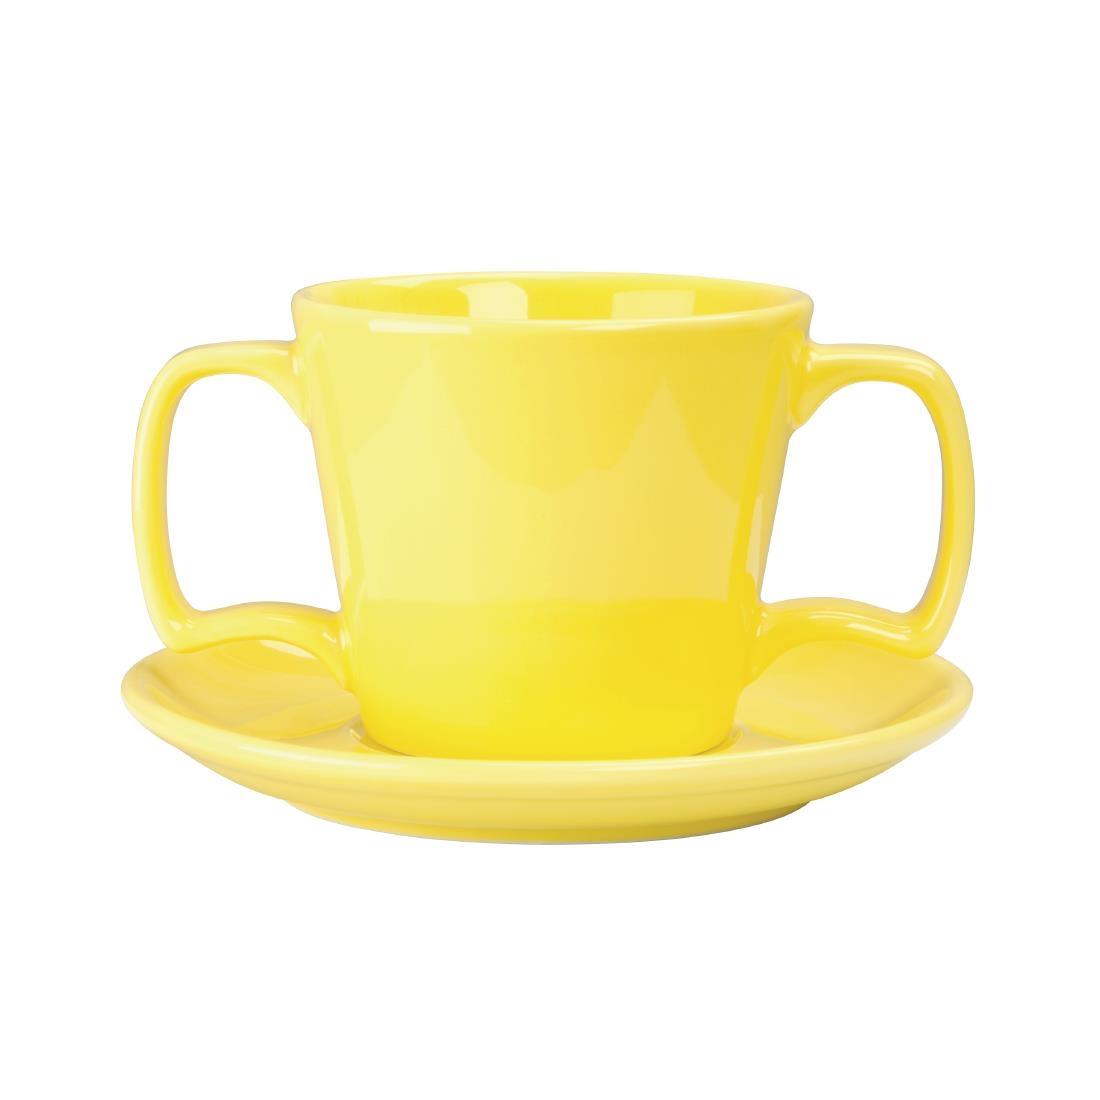 Olympia Heritage Double Well Saucers Yellow 163mm (Pack of 6) - DW151  - 4